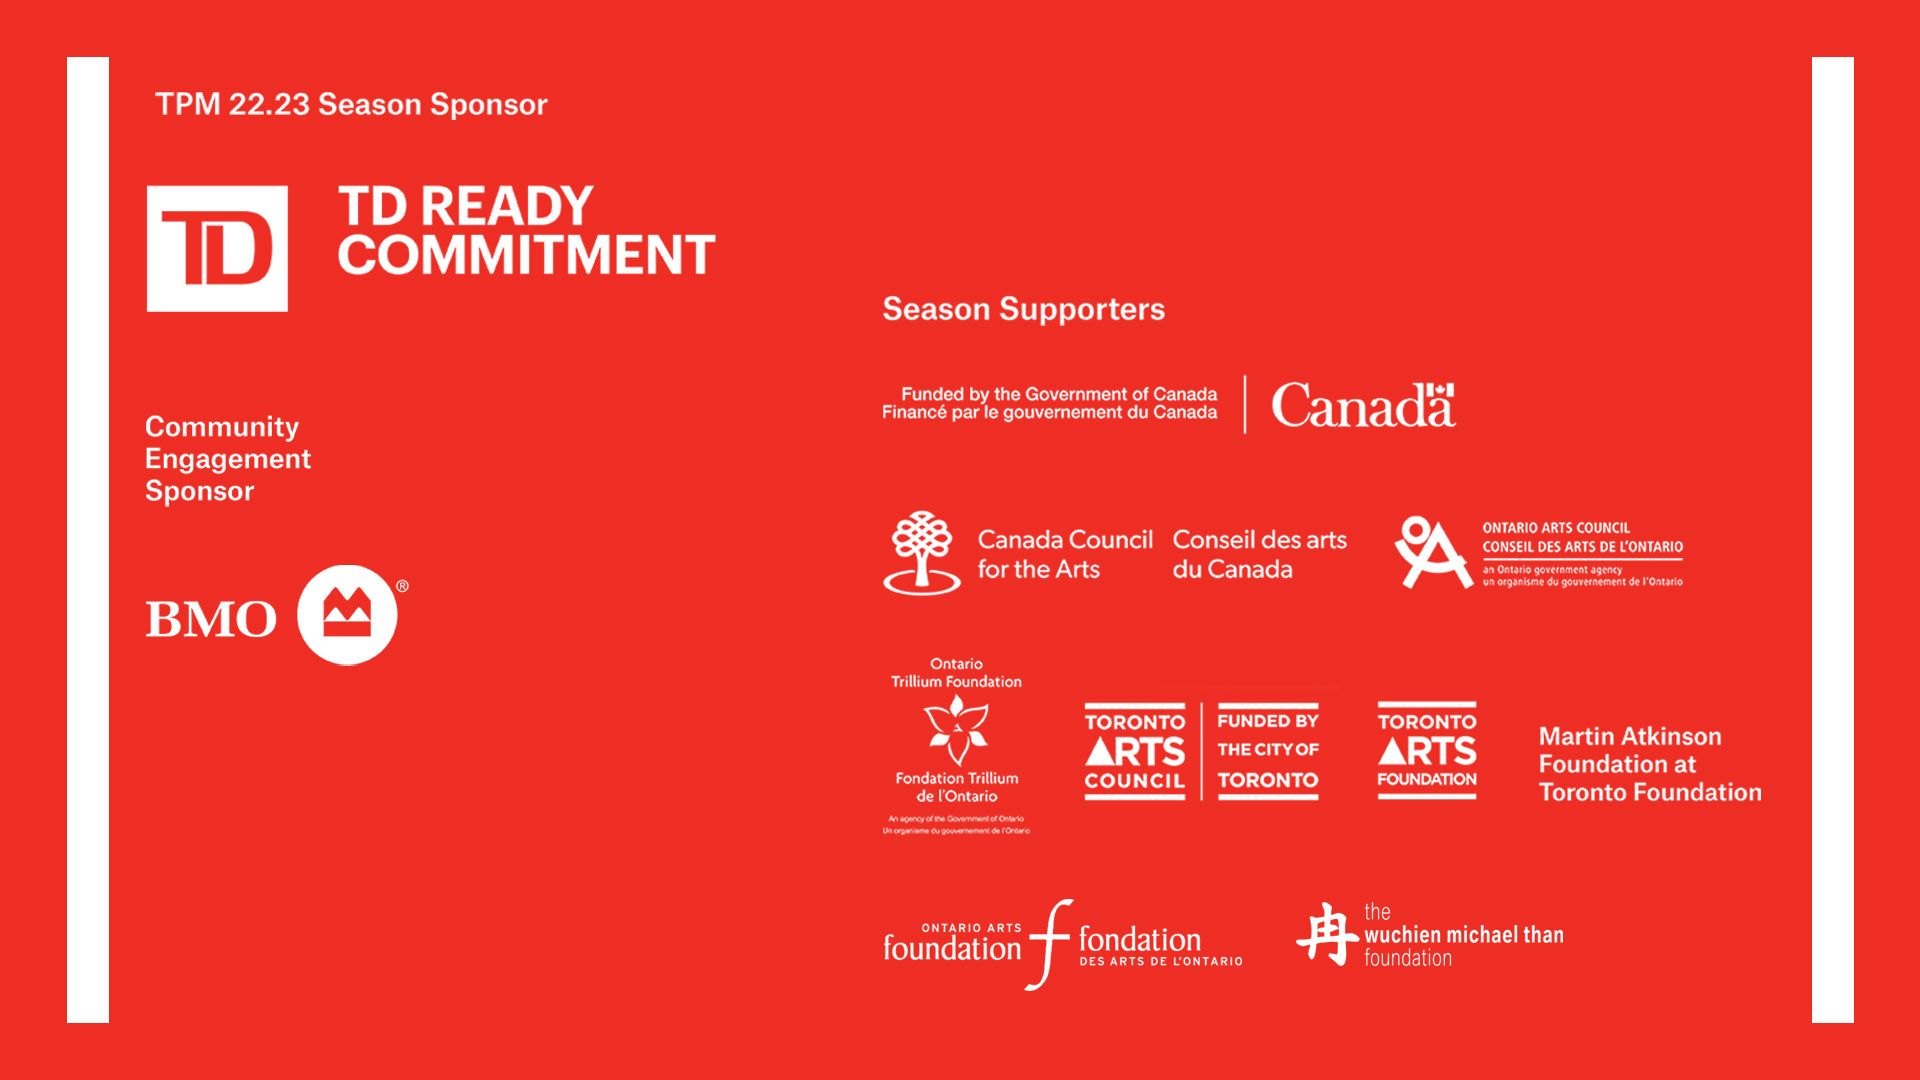 Theatre Passe Muraille's 22.23 season is sponsored by TD Ready Commitment, and our community enagement programs are sponsored by BMO. Our supporters include the Government of Canada, Canada Council for the Arts, Ontario Arts Council, Ontario Trillium Foundation, Toronto Arts Foundation, Toronto Arts Council, and Martin Atkinson Foundation at Toronto Foundation, the Wuchien Michael Than Foundation, and the Ontario Arts Foundation.